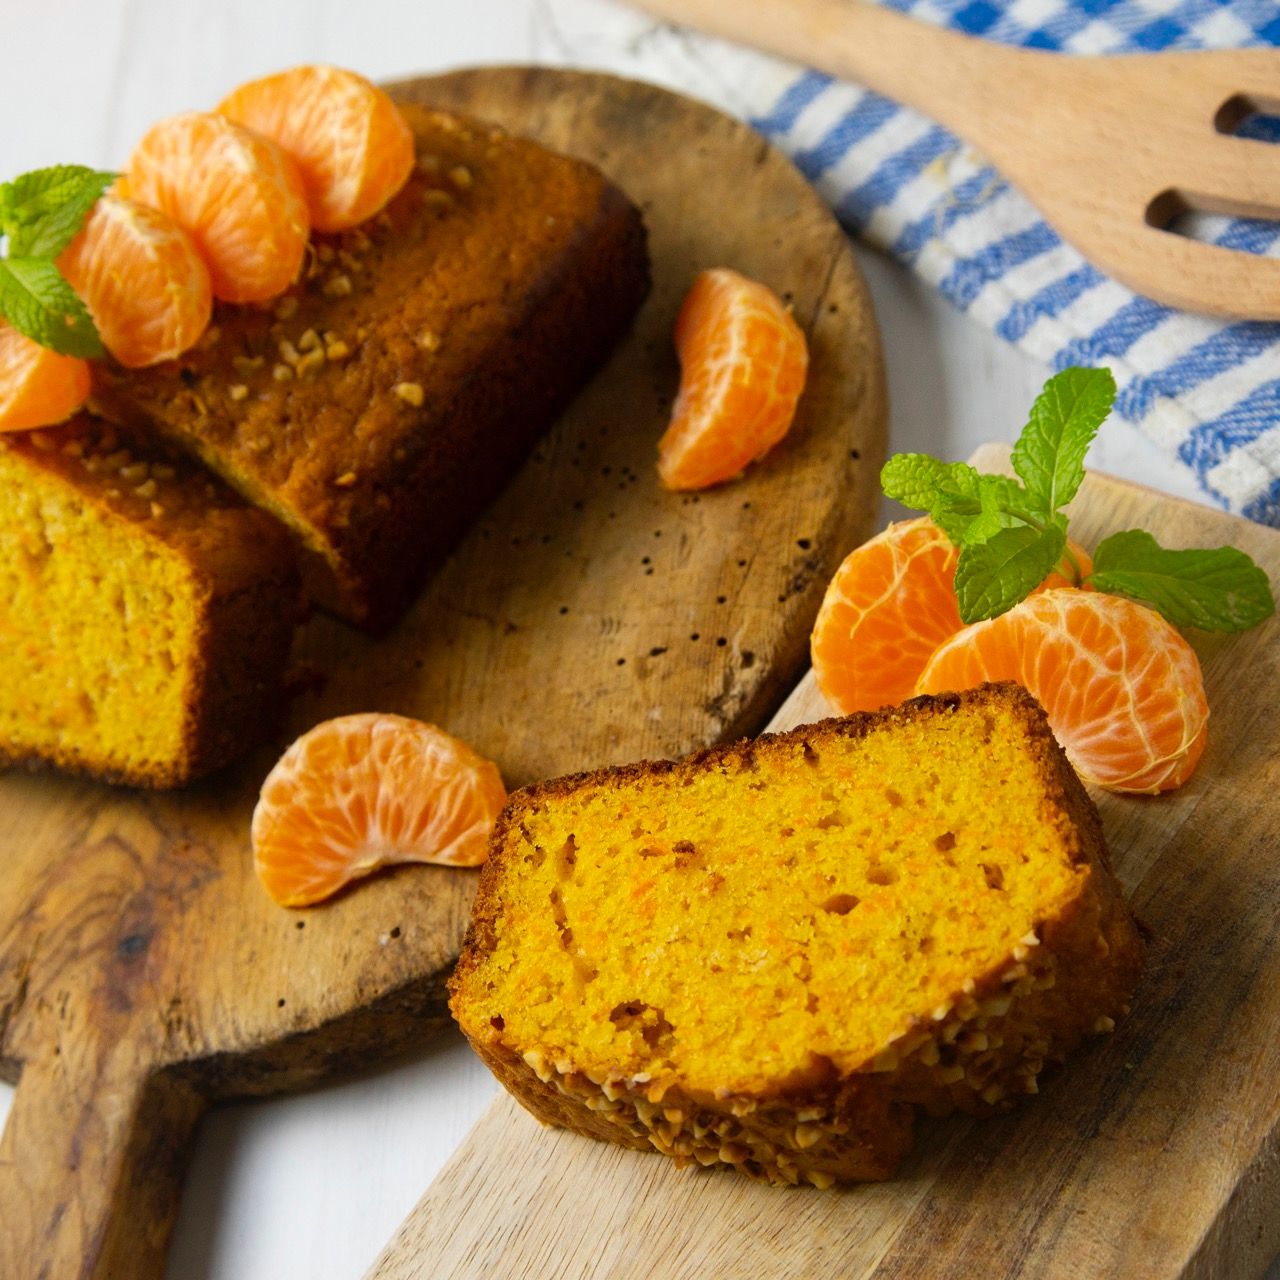 Delicious-vegan-carrot-and-tangerine-sponge-cake-with-ground-almonds.-1341791821_6000x4000 square Large.jpeg